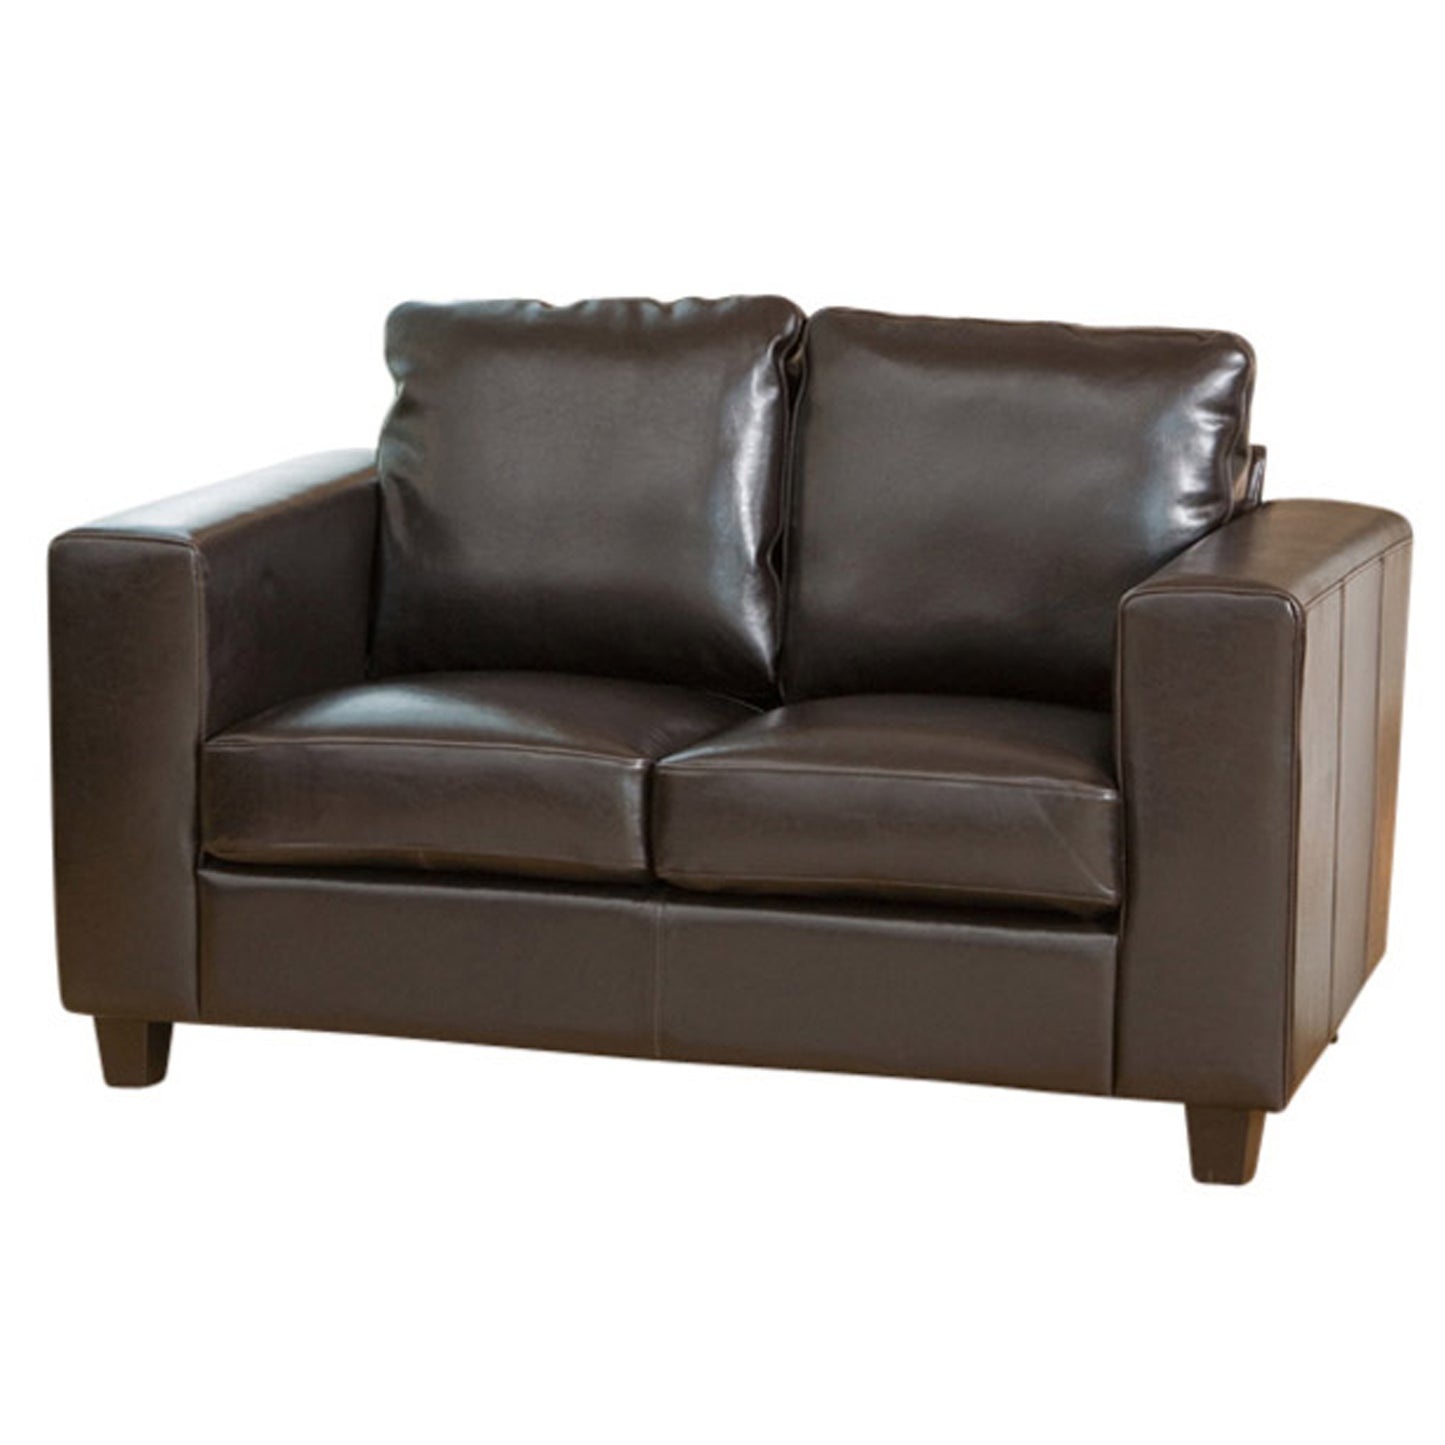 Commercial Grade Leather Sofa Available in black, brown, ivory, red. - CasaFenix